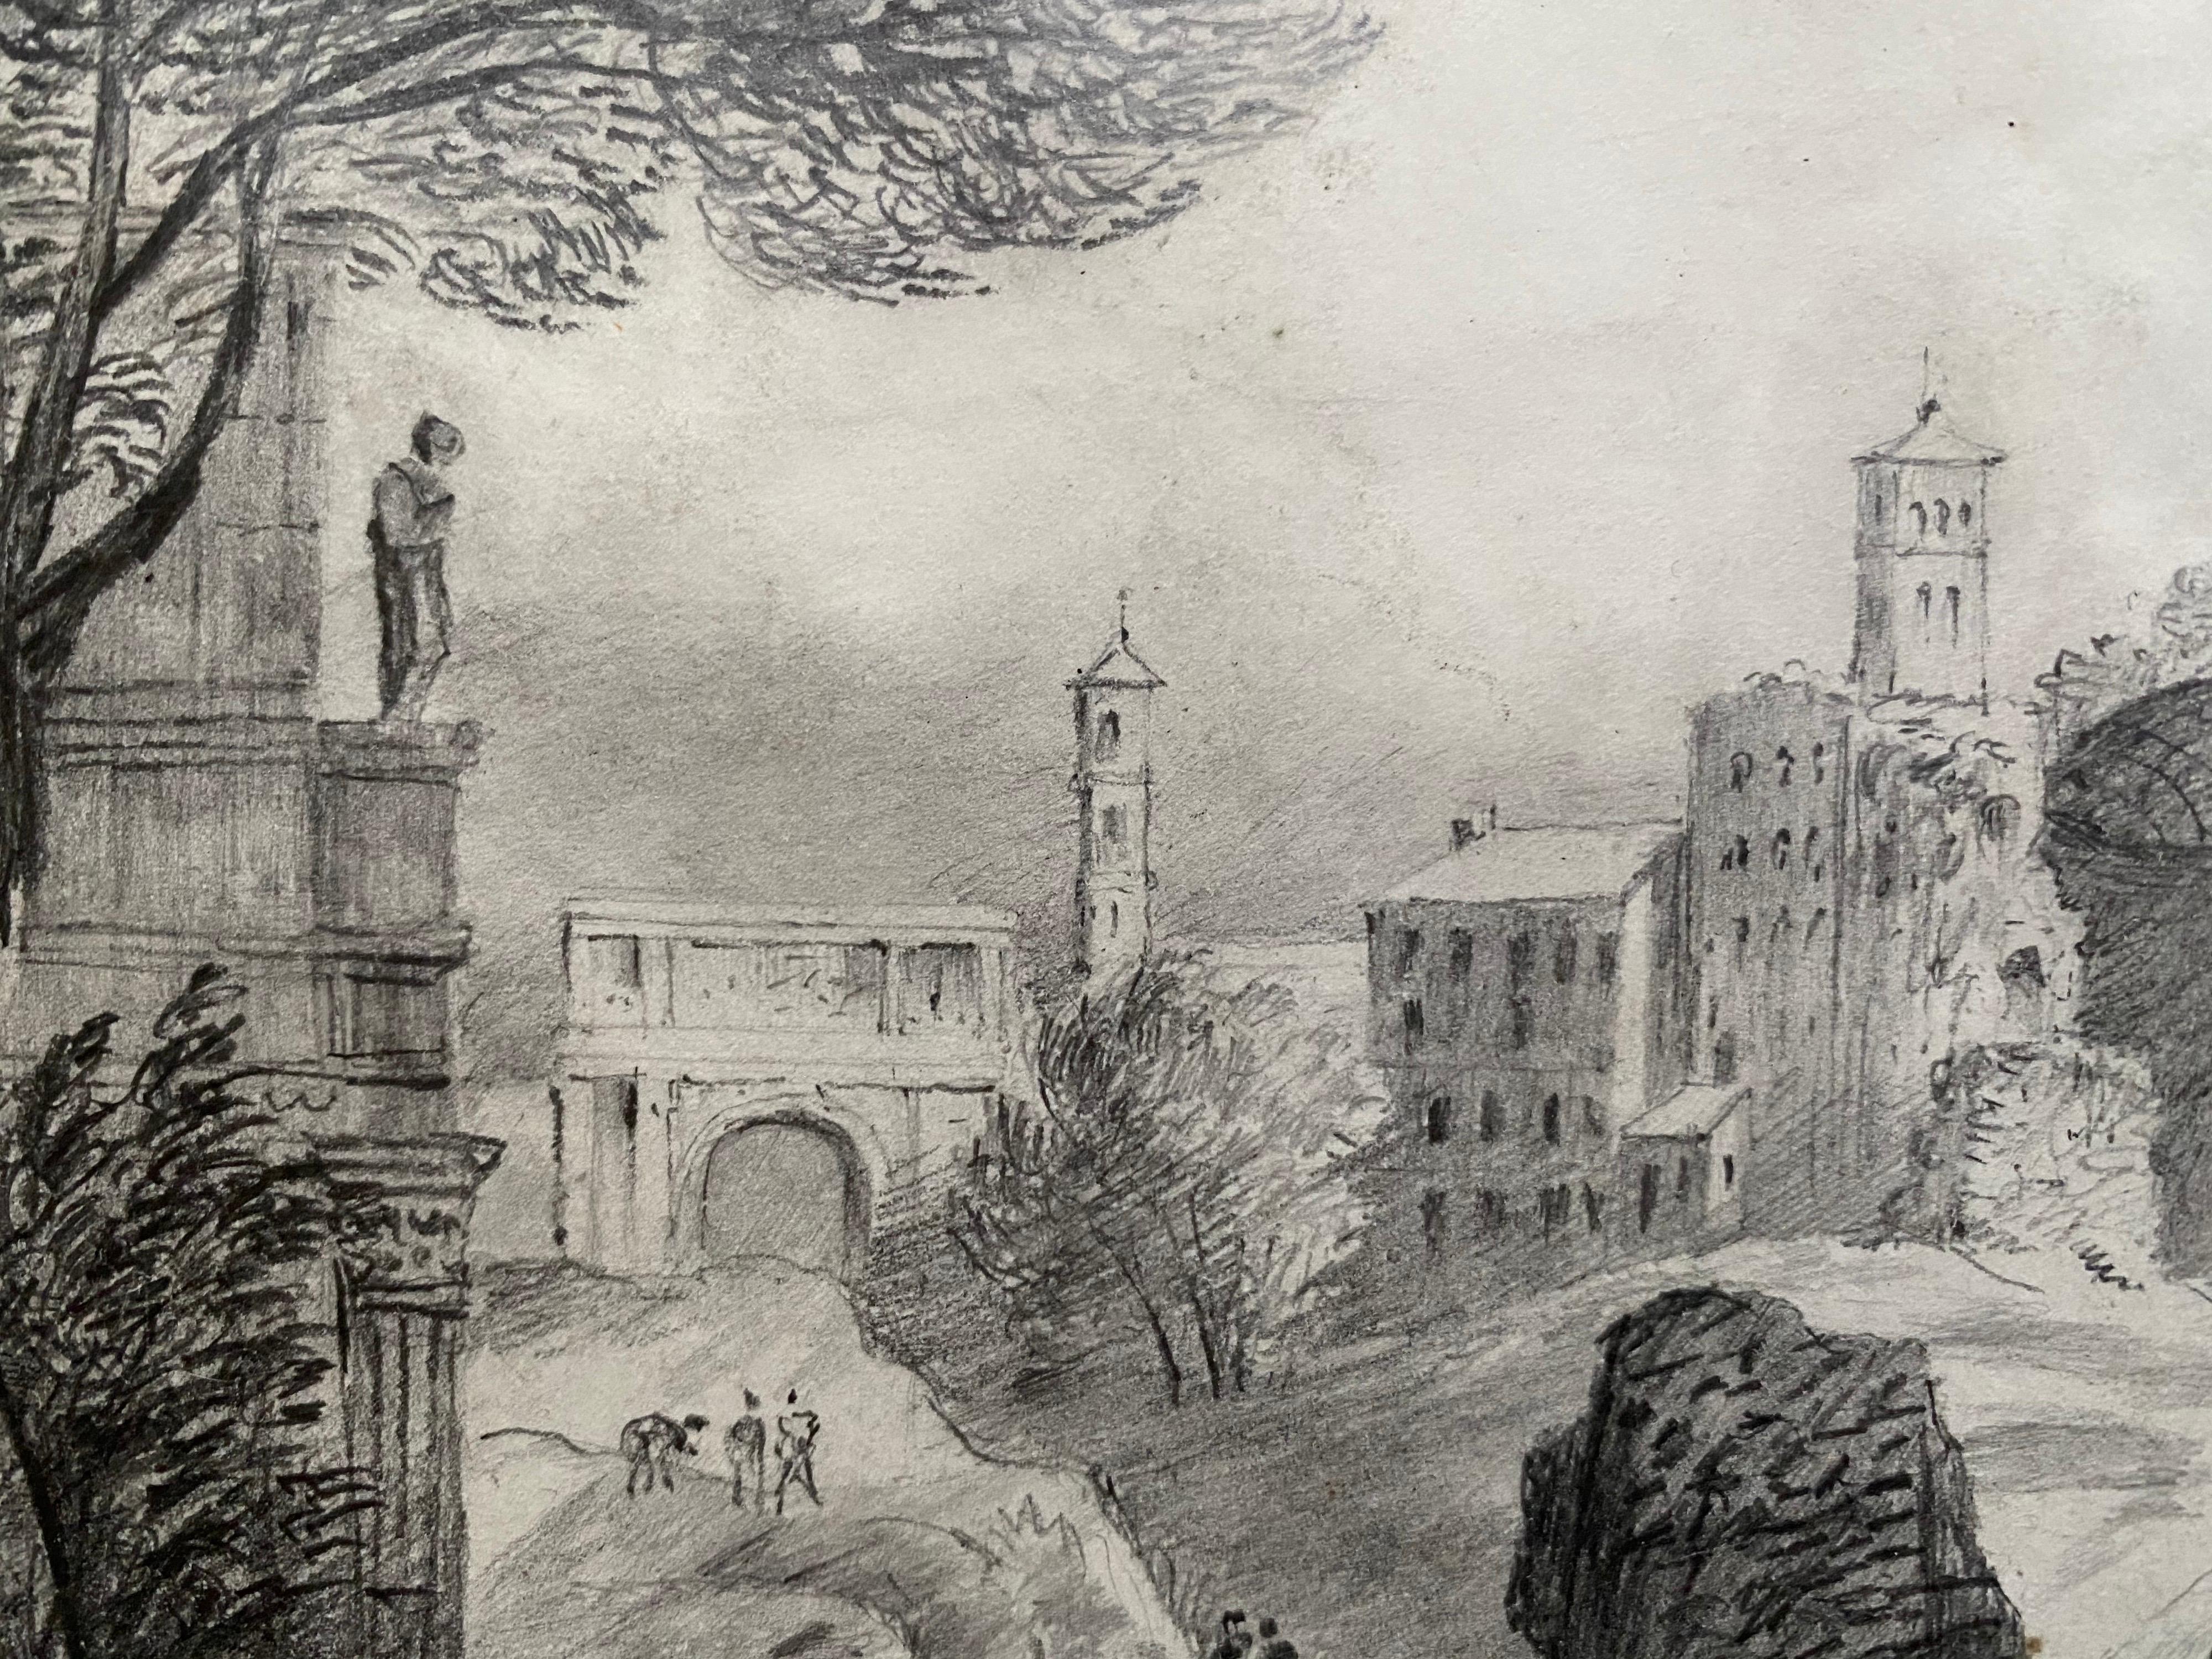 Title: The Italian City

Artist/ School: English/ Italian School, late 18th century; a Grand Tour work. 

Medium: pencil drawing. 

Size: 6.75 x 9.75 inches

Provenance: from a private European collection

Condition report:
The paper is very much in